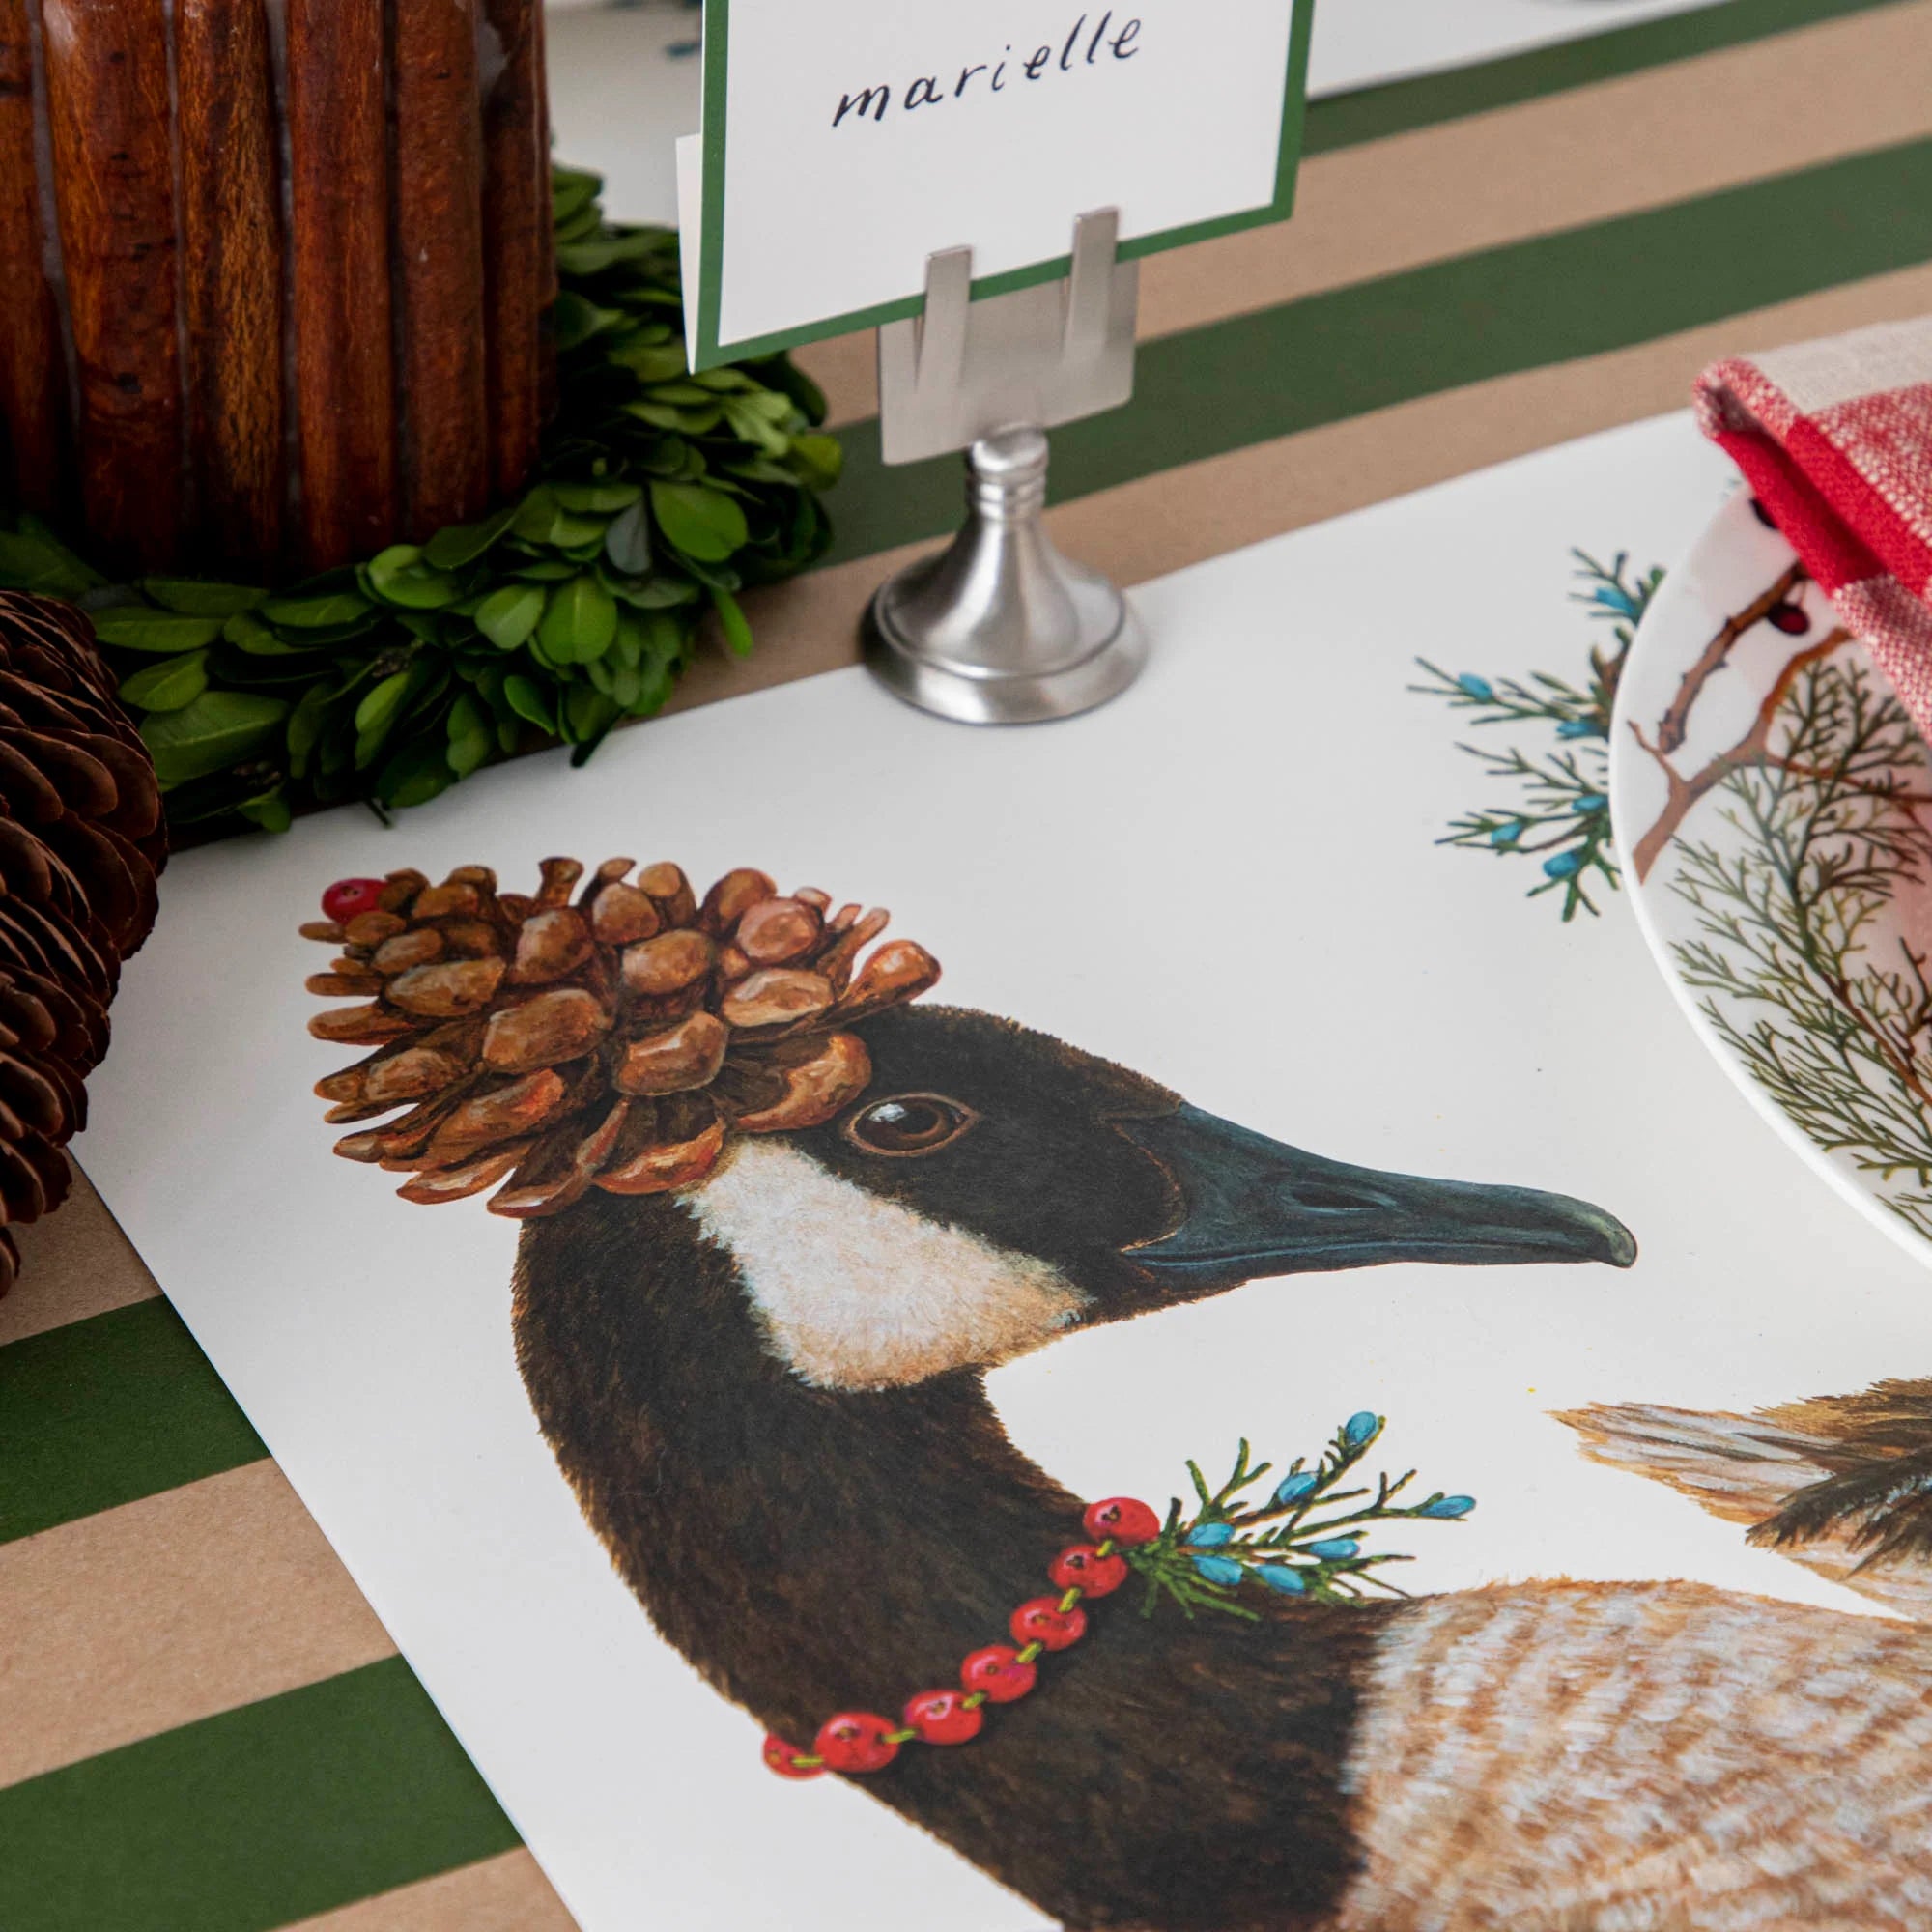 Festive Geese Placemat